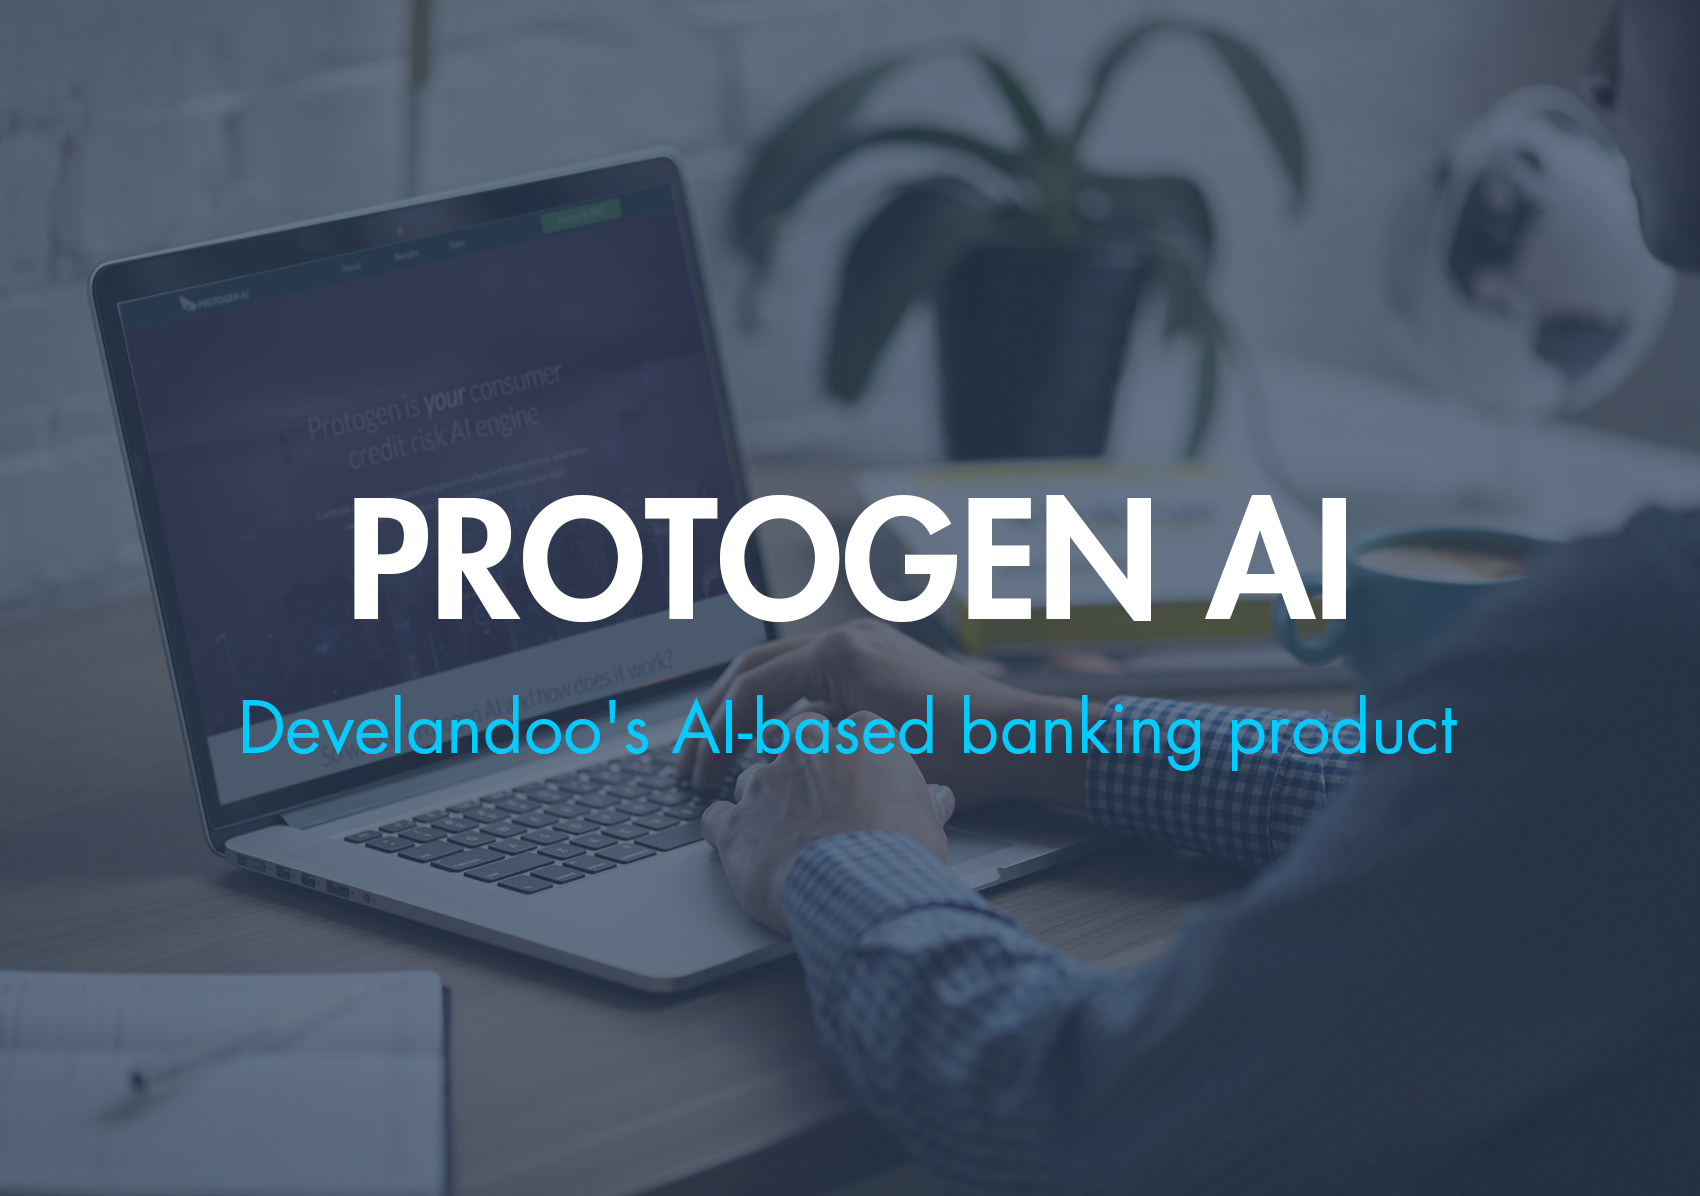 Develandoo Has Developed an AI Banking Product Capable of Building Fast, Accurate and Interpretable Predictive Systems